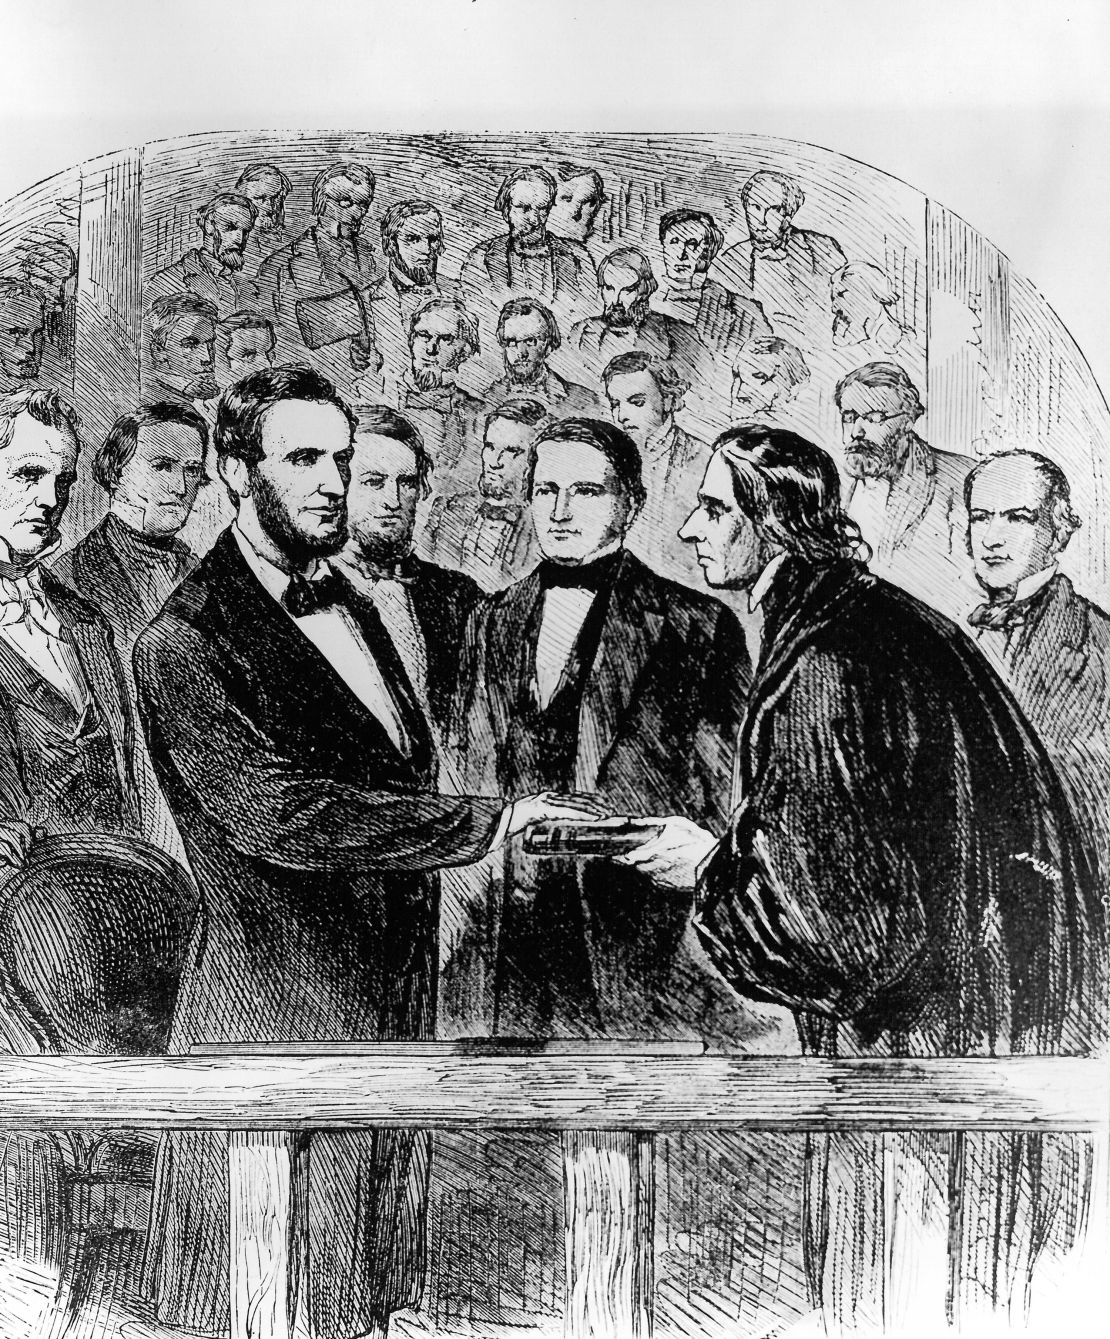 Abraham Lincoln's inauguration as 16th President of the United States at Washington, D.C., with outgoing President James Buchanan and Chief Justice of the United States Roger Brooke Taney. 